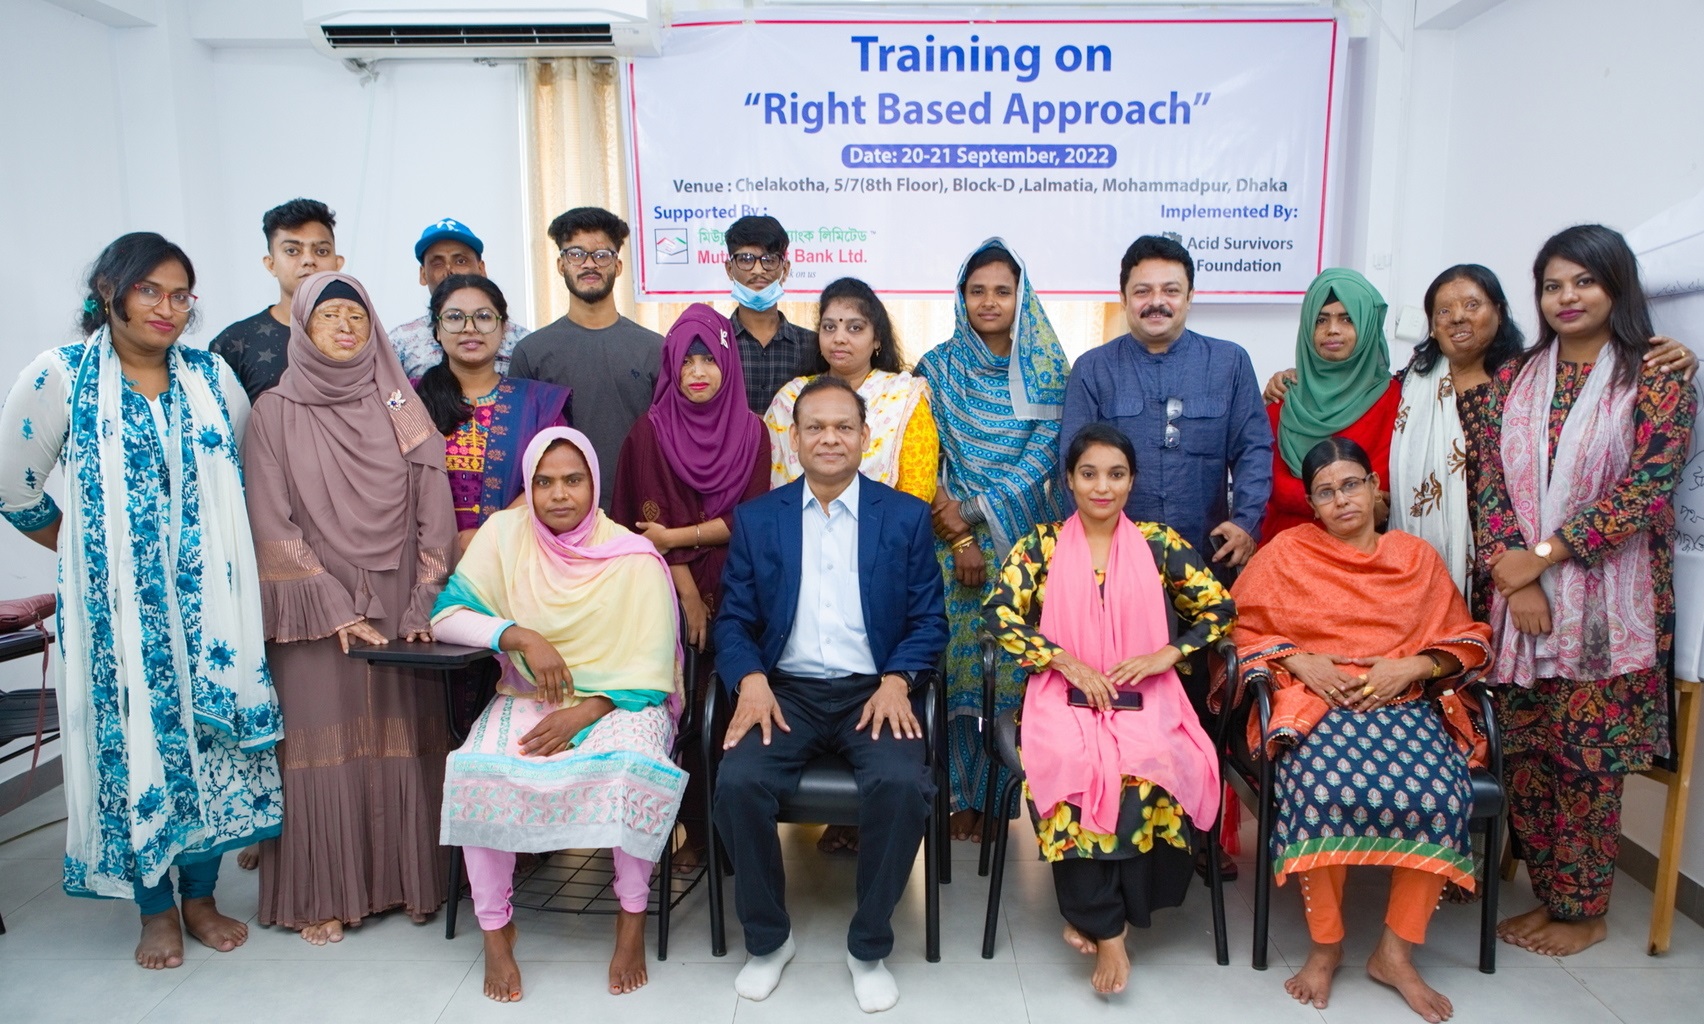 Initiative to change: Training on Right Based Approach